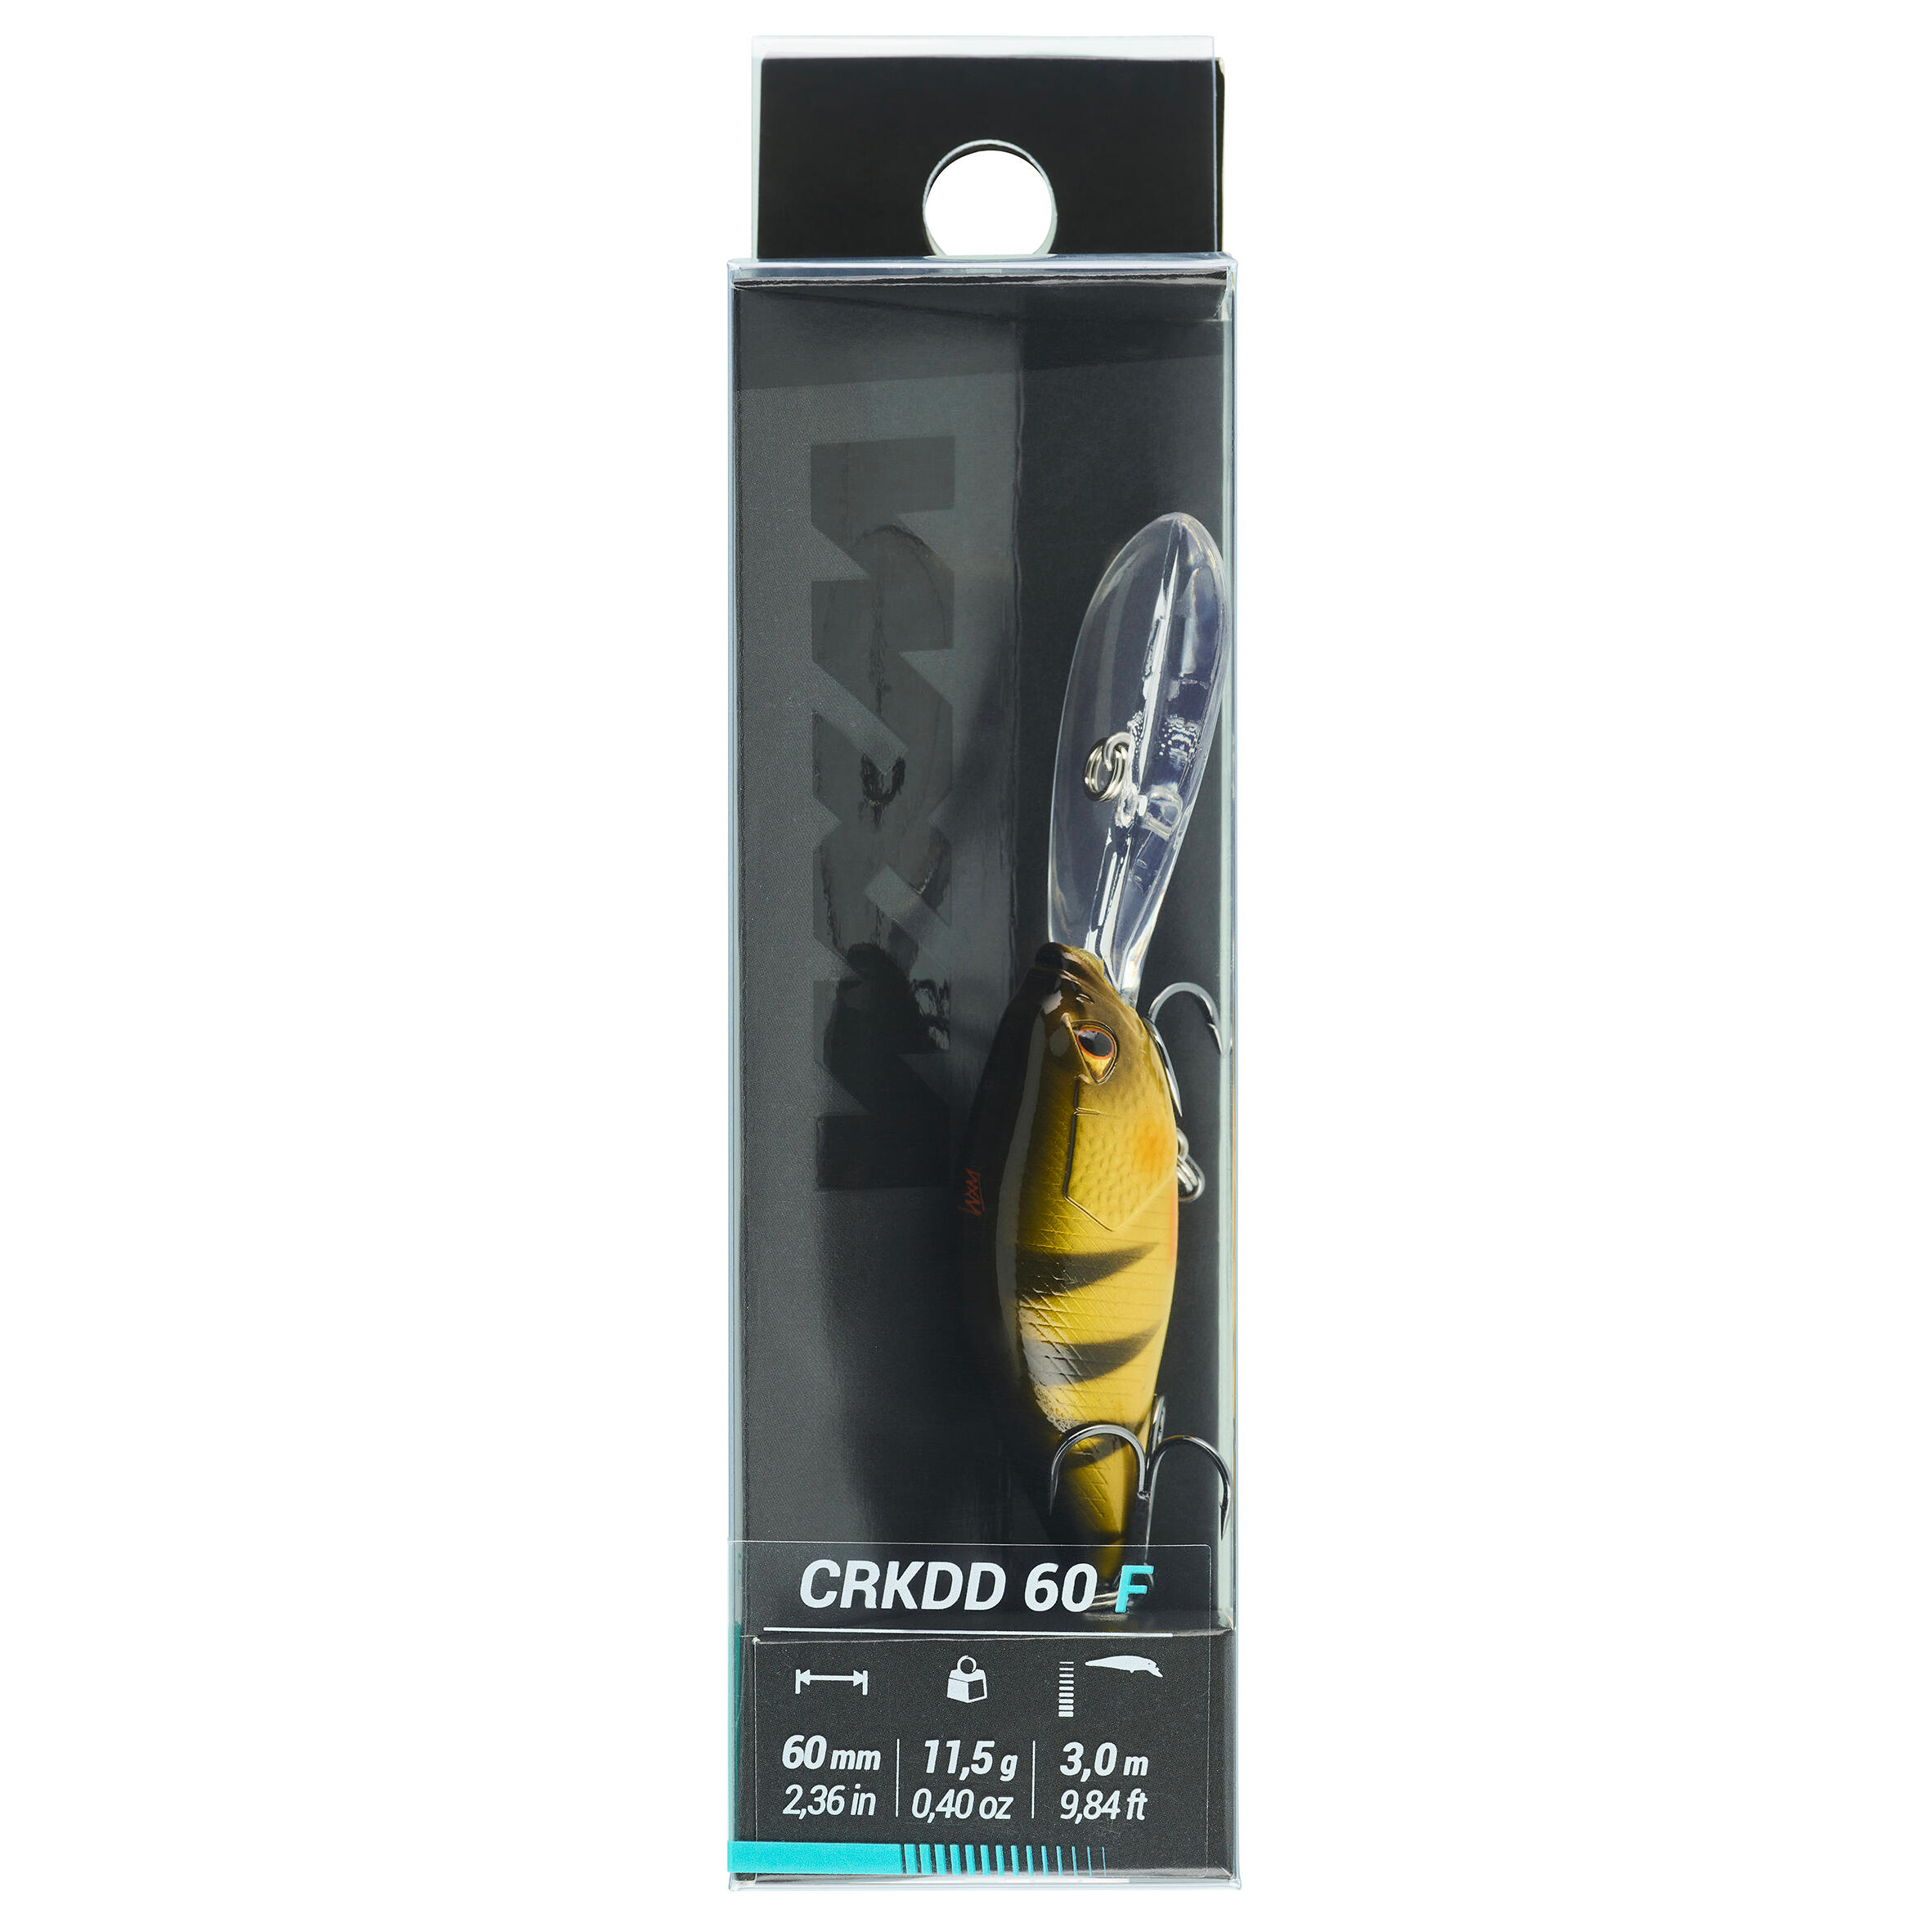 DEEP CRANKBAIT HARD LURE FOR PERCH WXM CRKDD 60 F 4/4